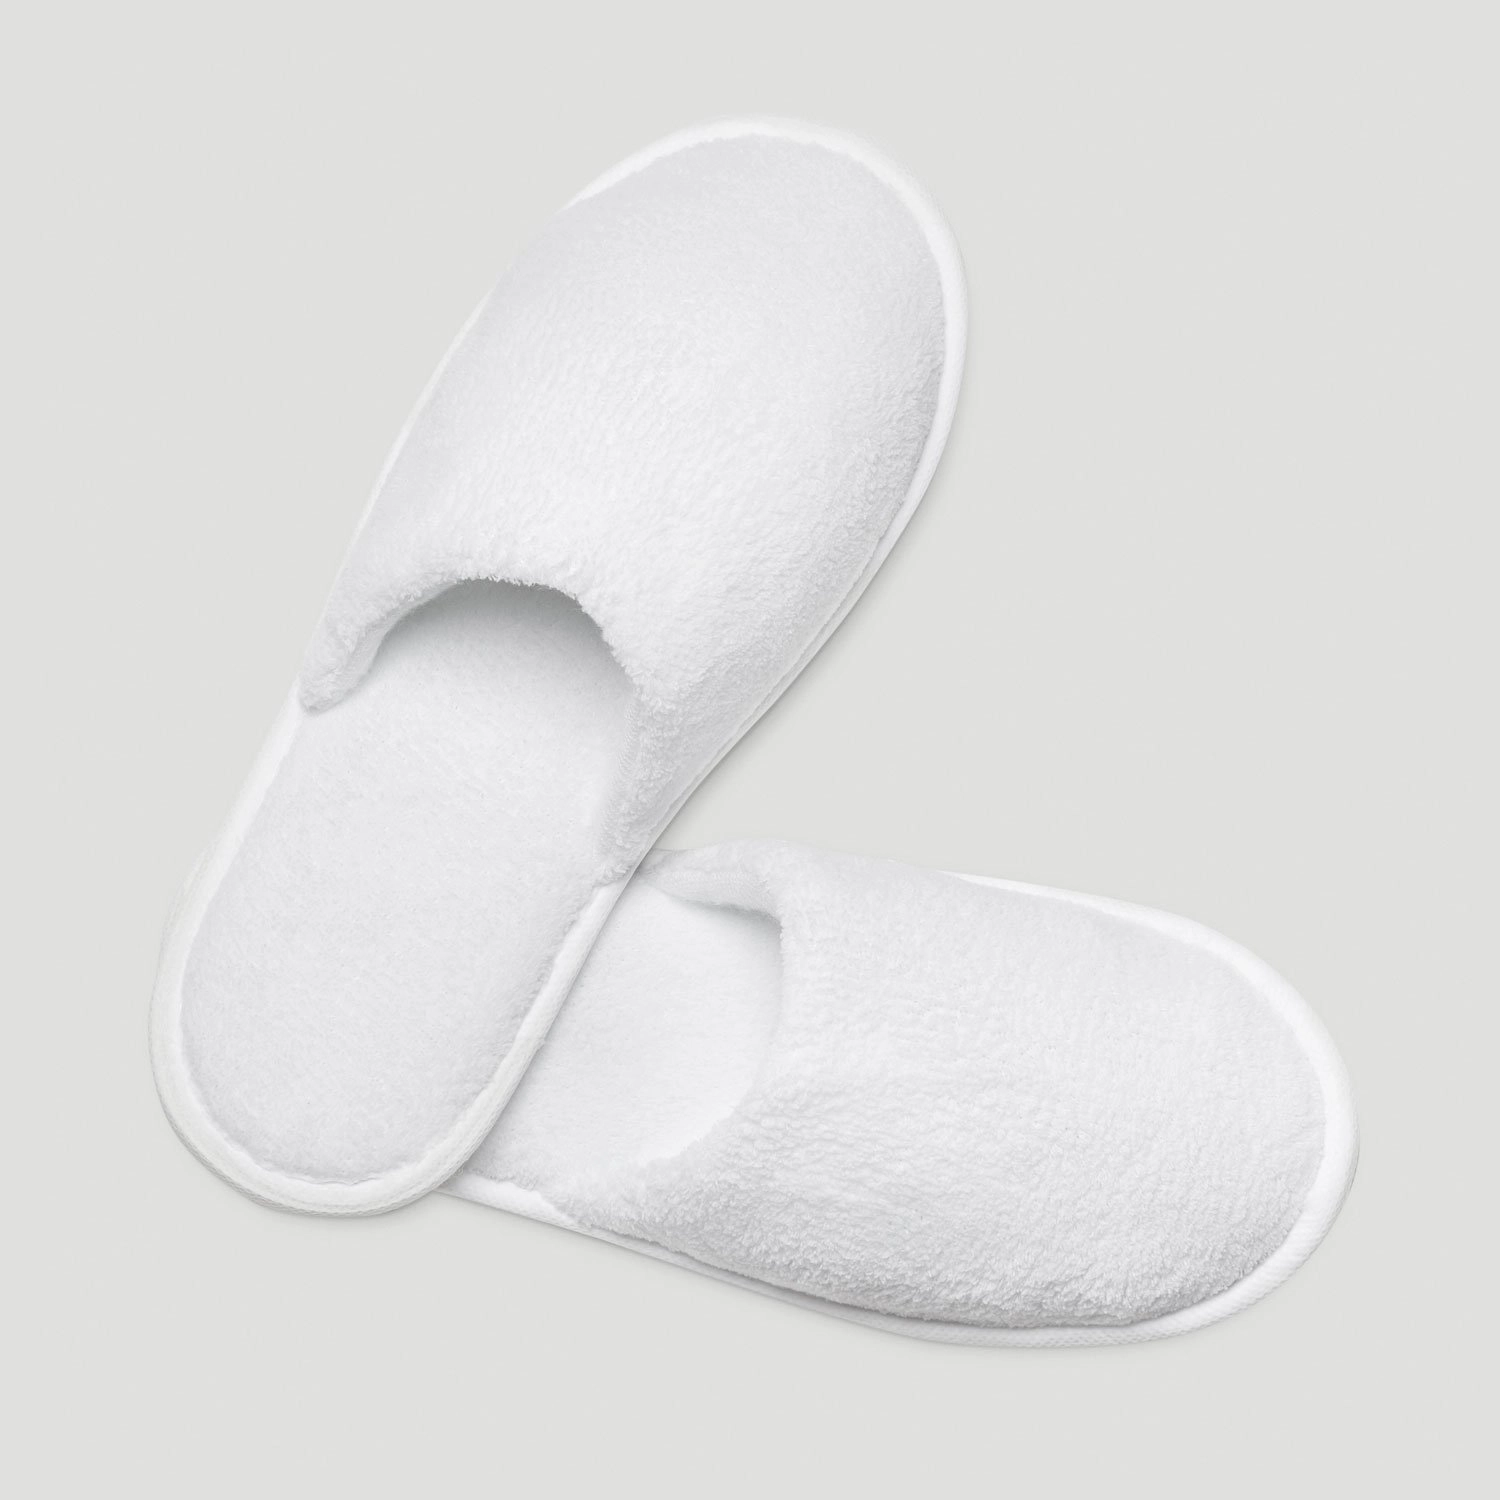 Men :: Slippers :: Terry Slippers :: White Closed Toe Adult Fleece Warm  Slippers - 6 pack - Wholesale bathrobes, Spa robes, Kids robes, Cotton  robes, Spa Slippers, Wholesale Towels